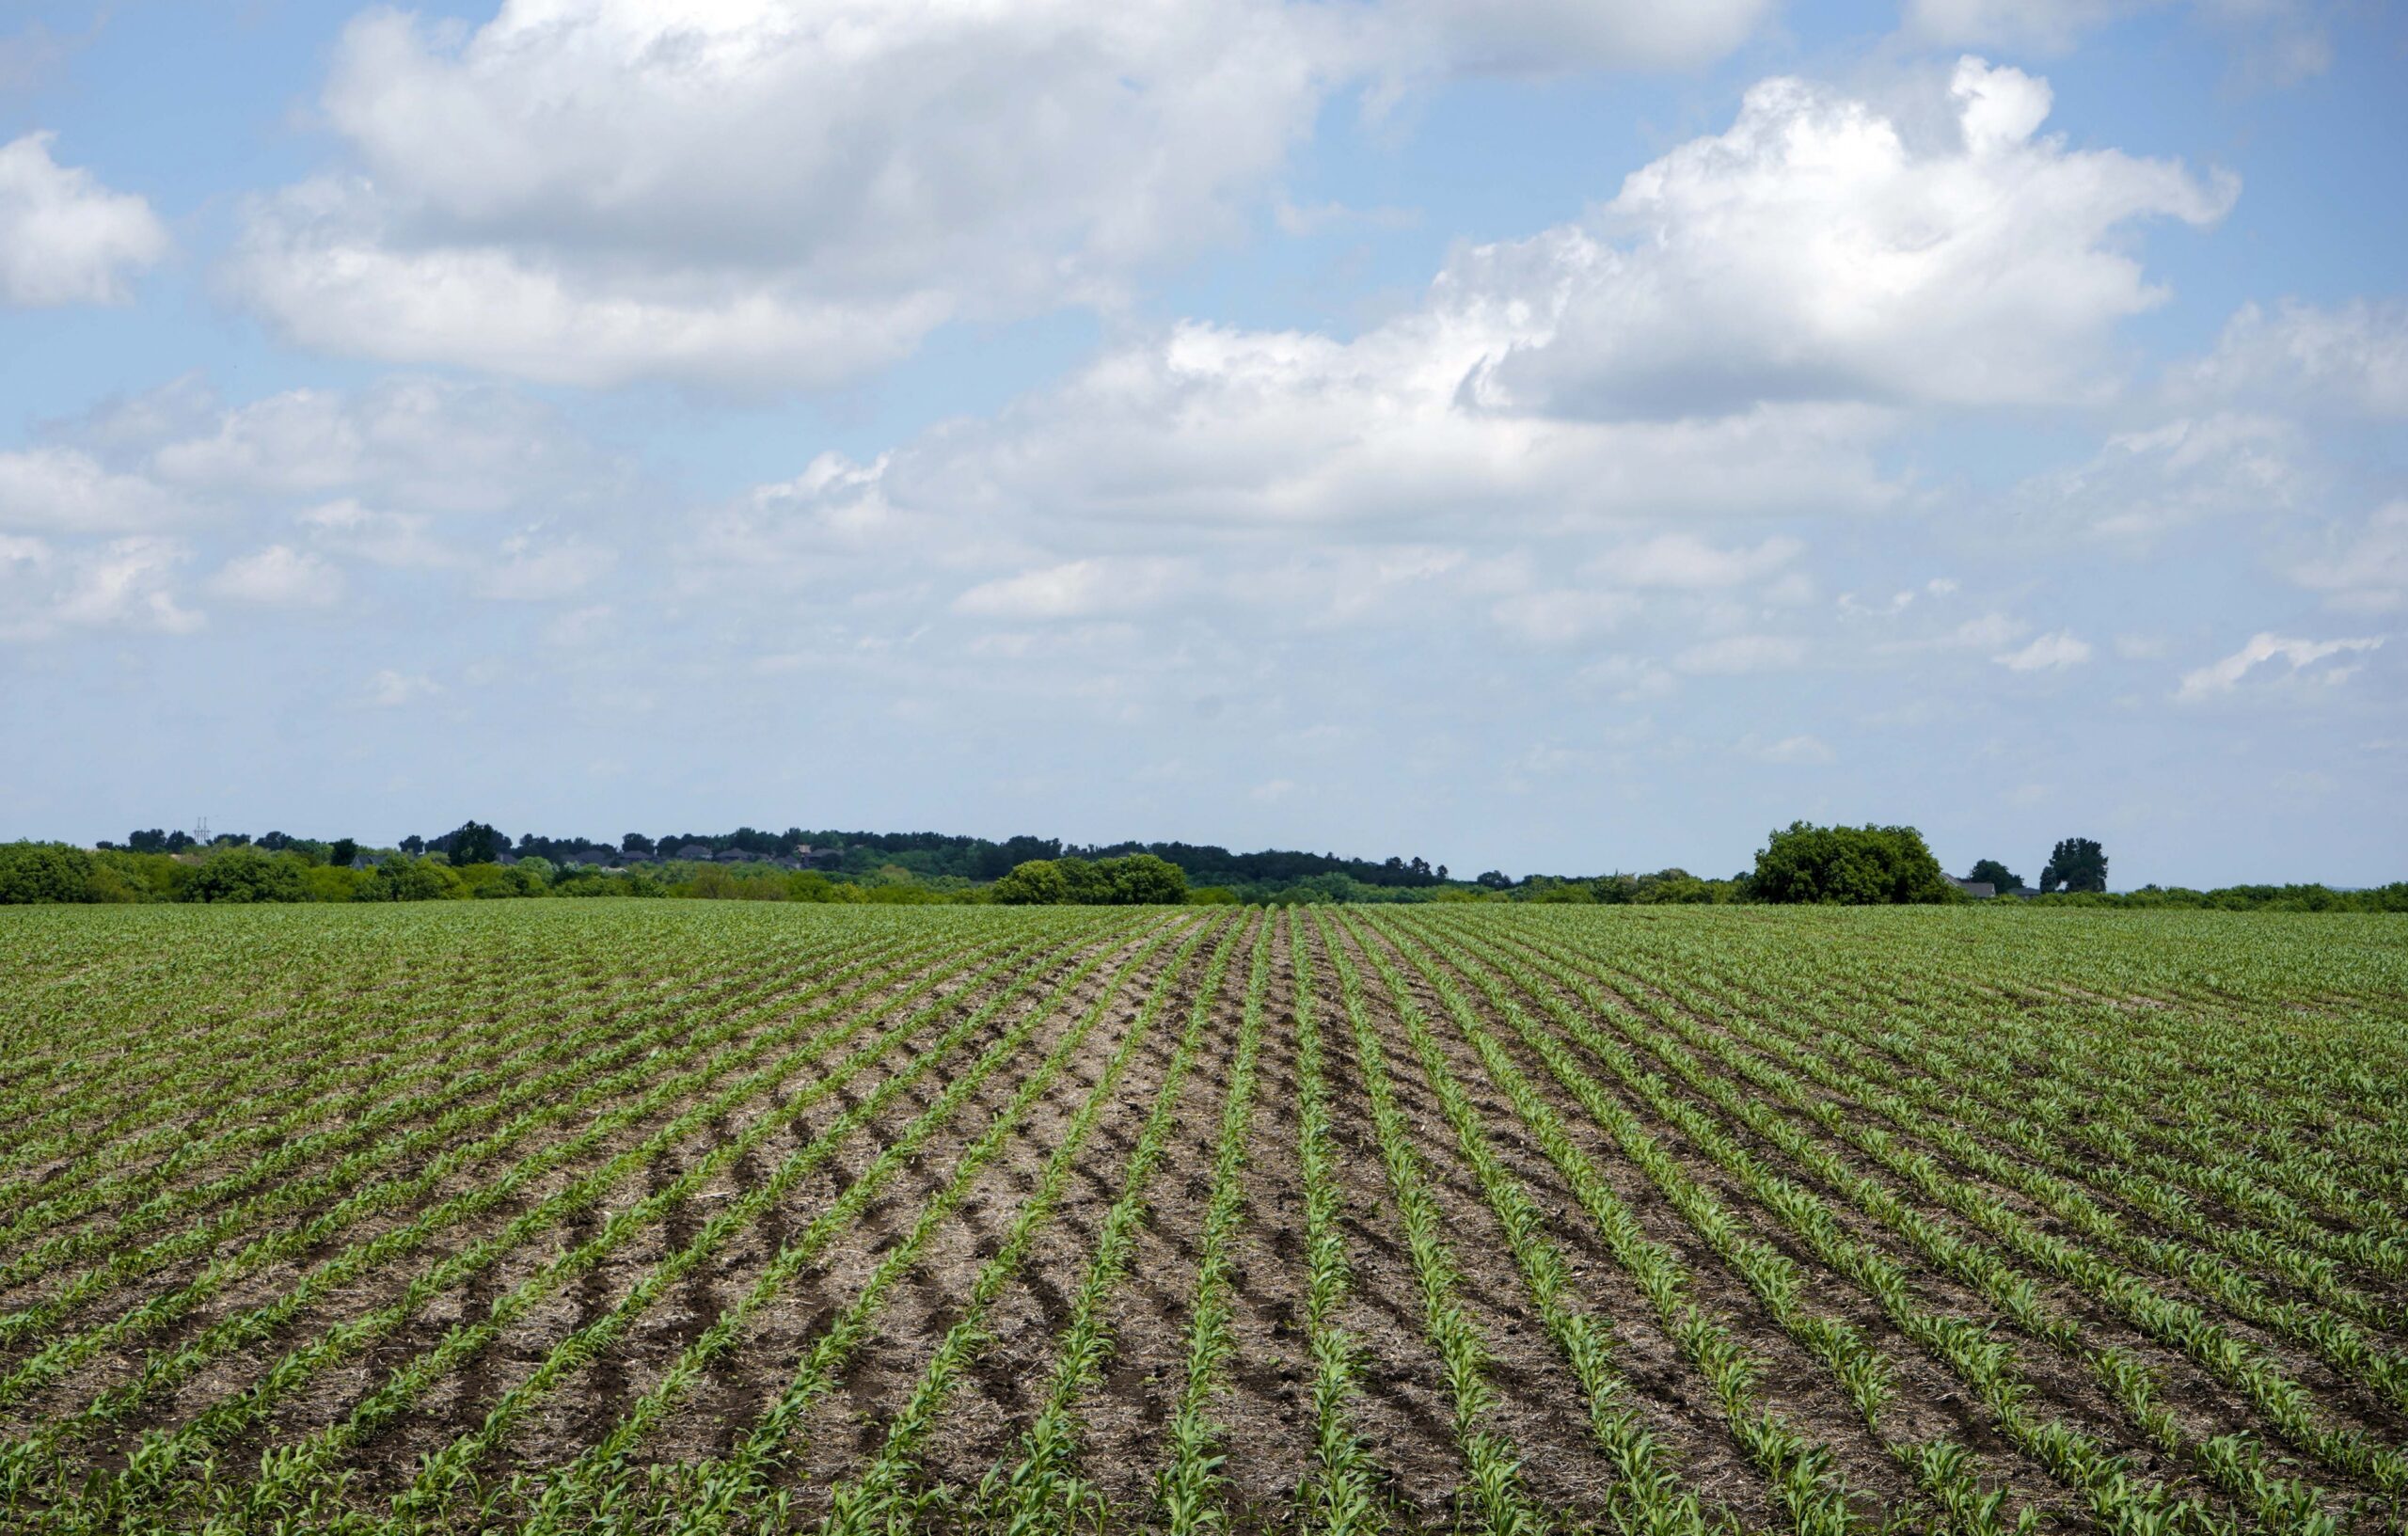 Young corn plants grow in a field